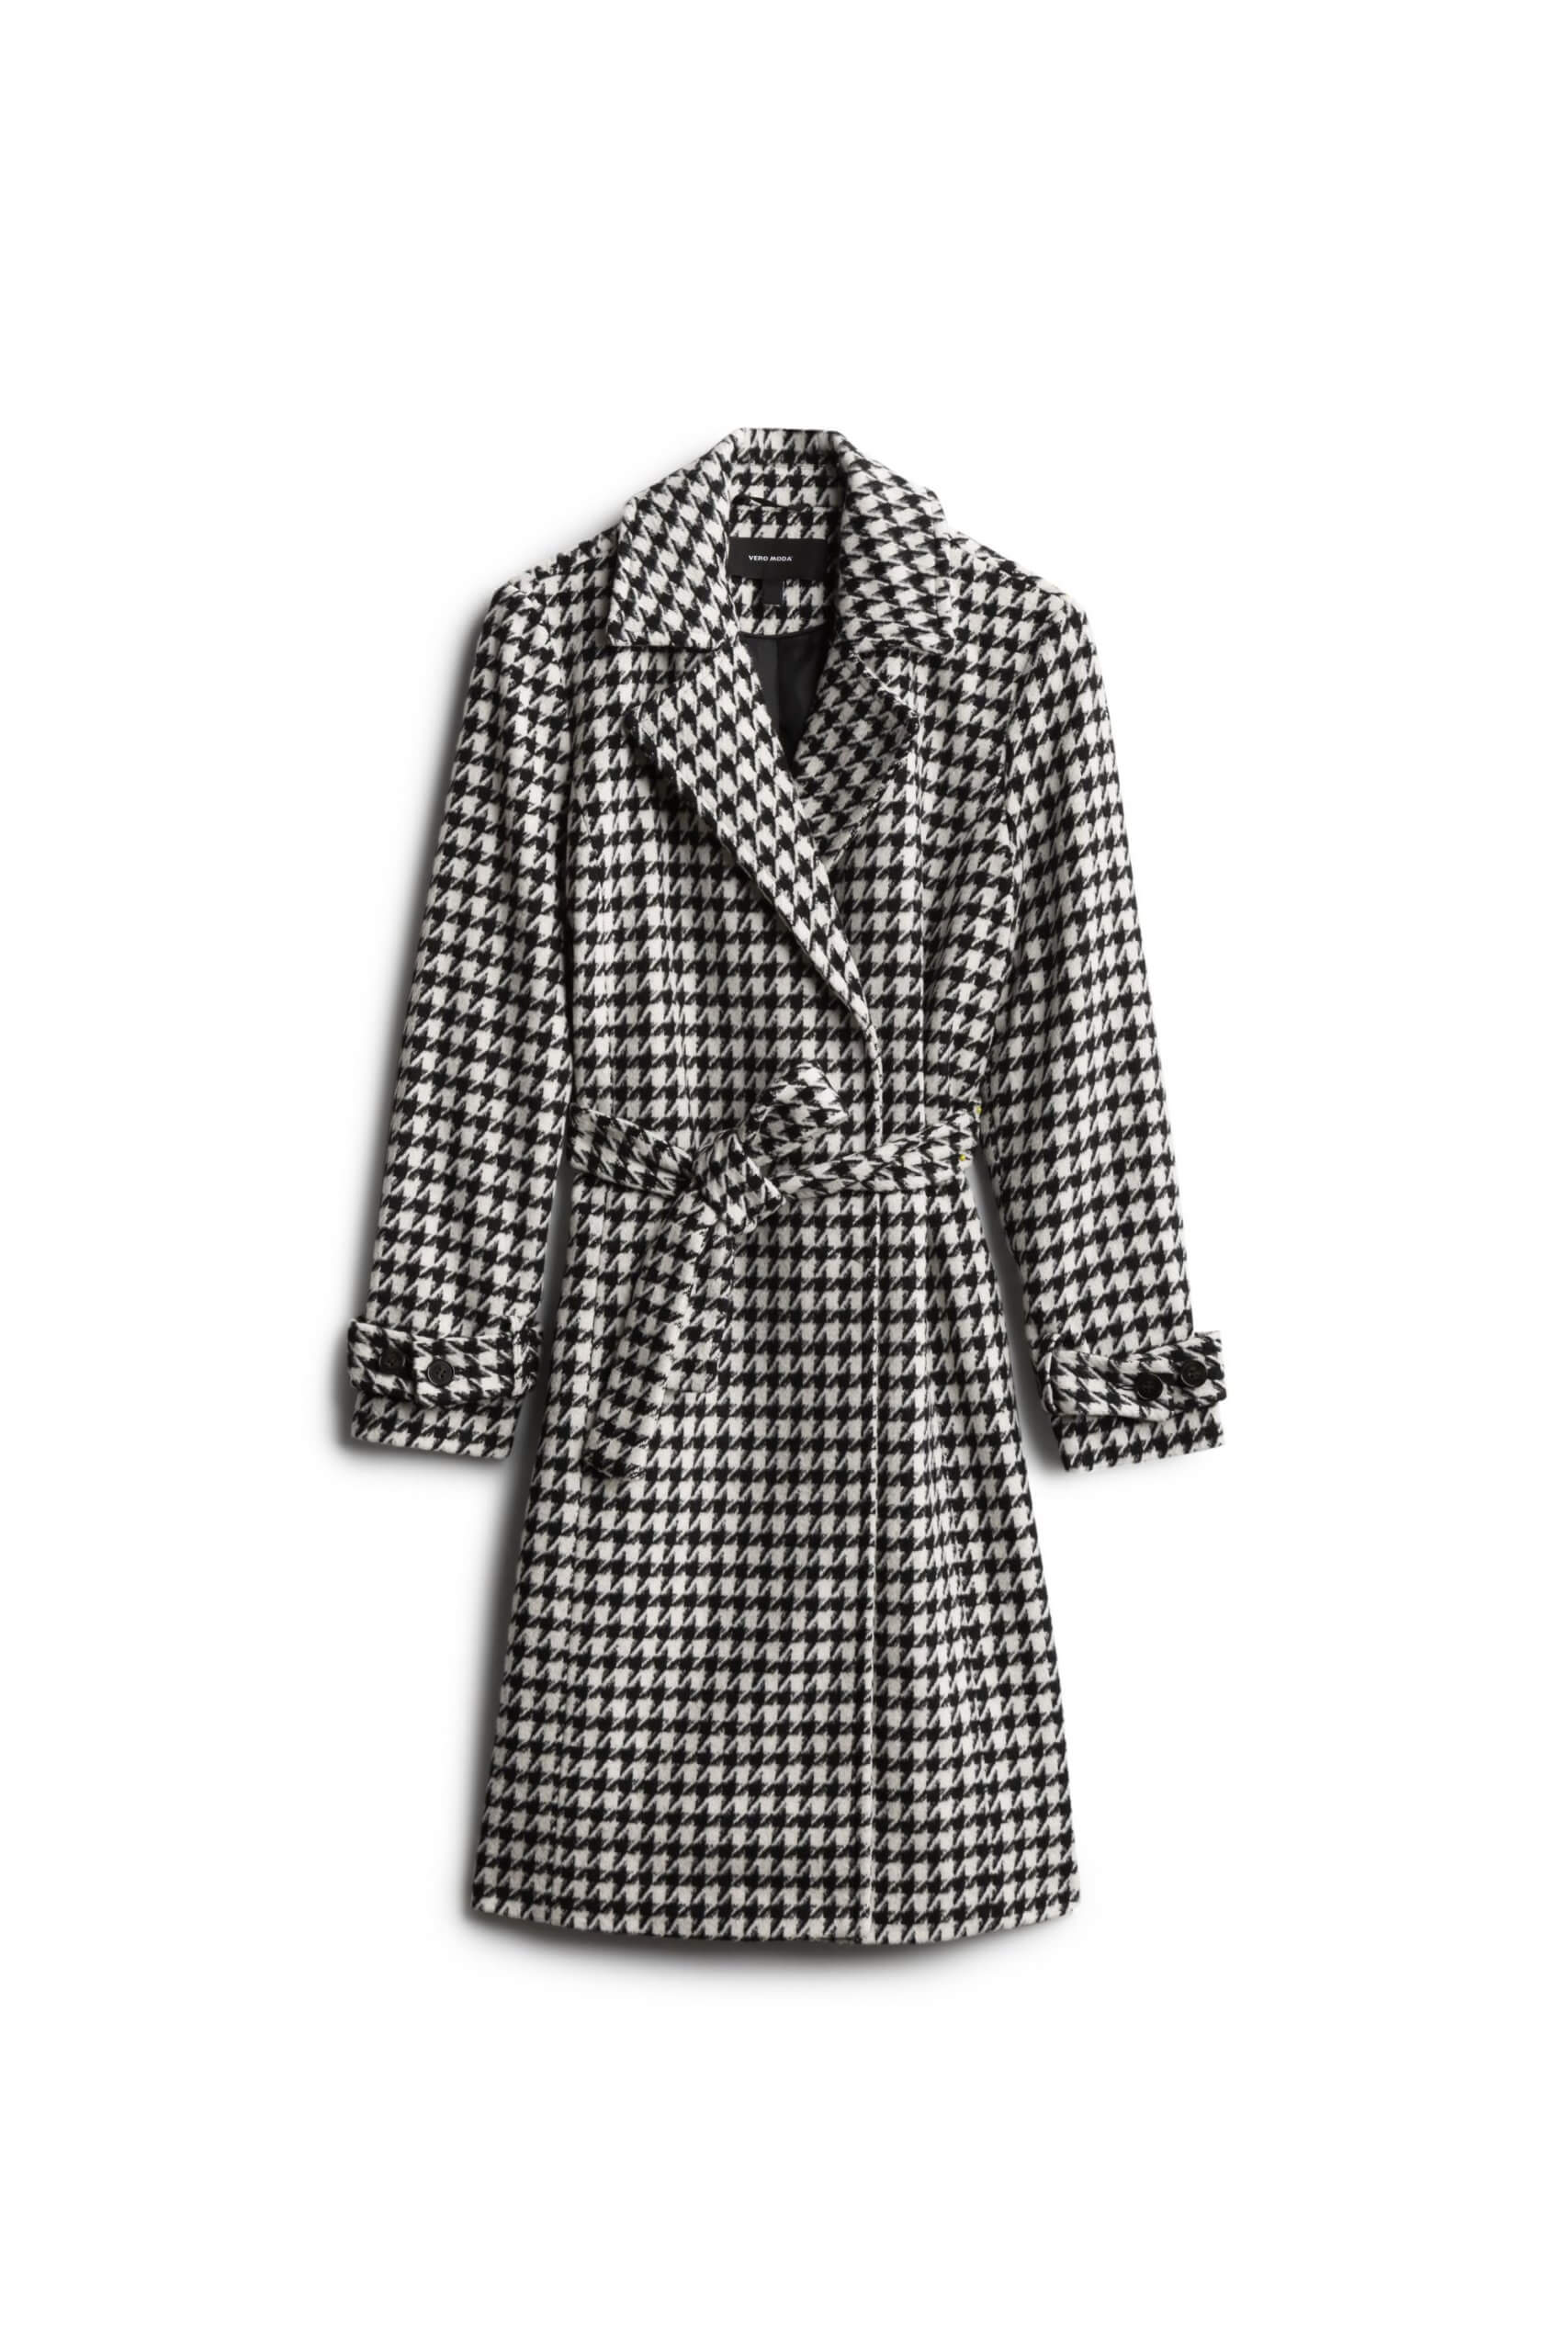 Any tips for styling a coat dress?